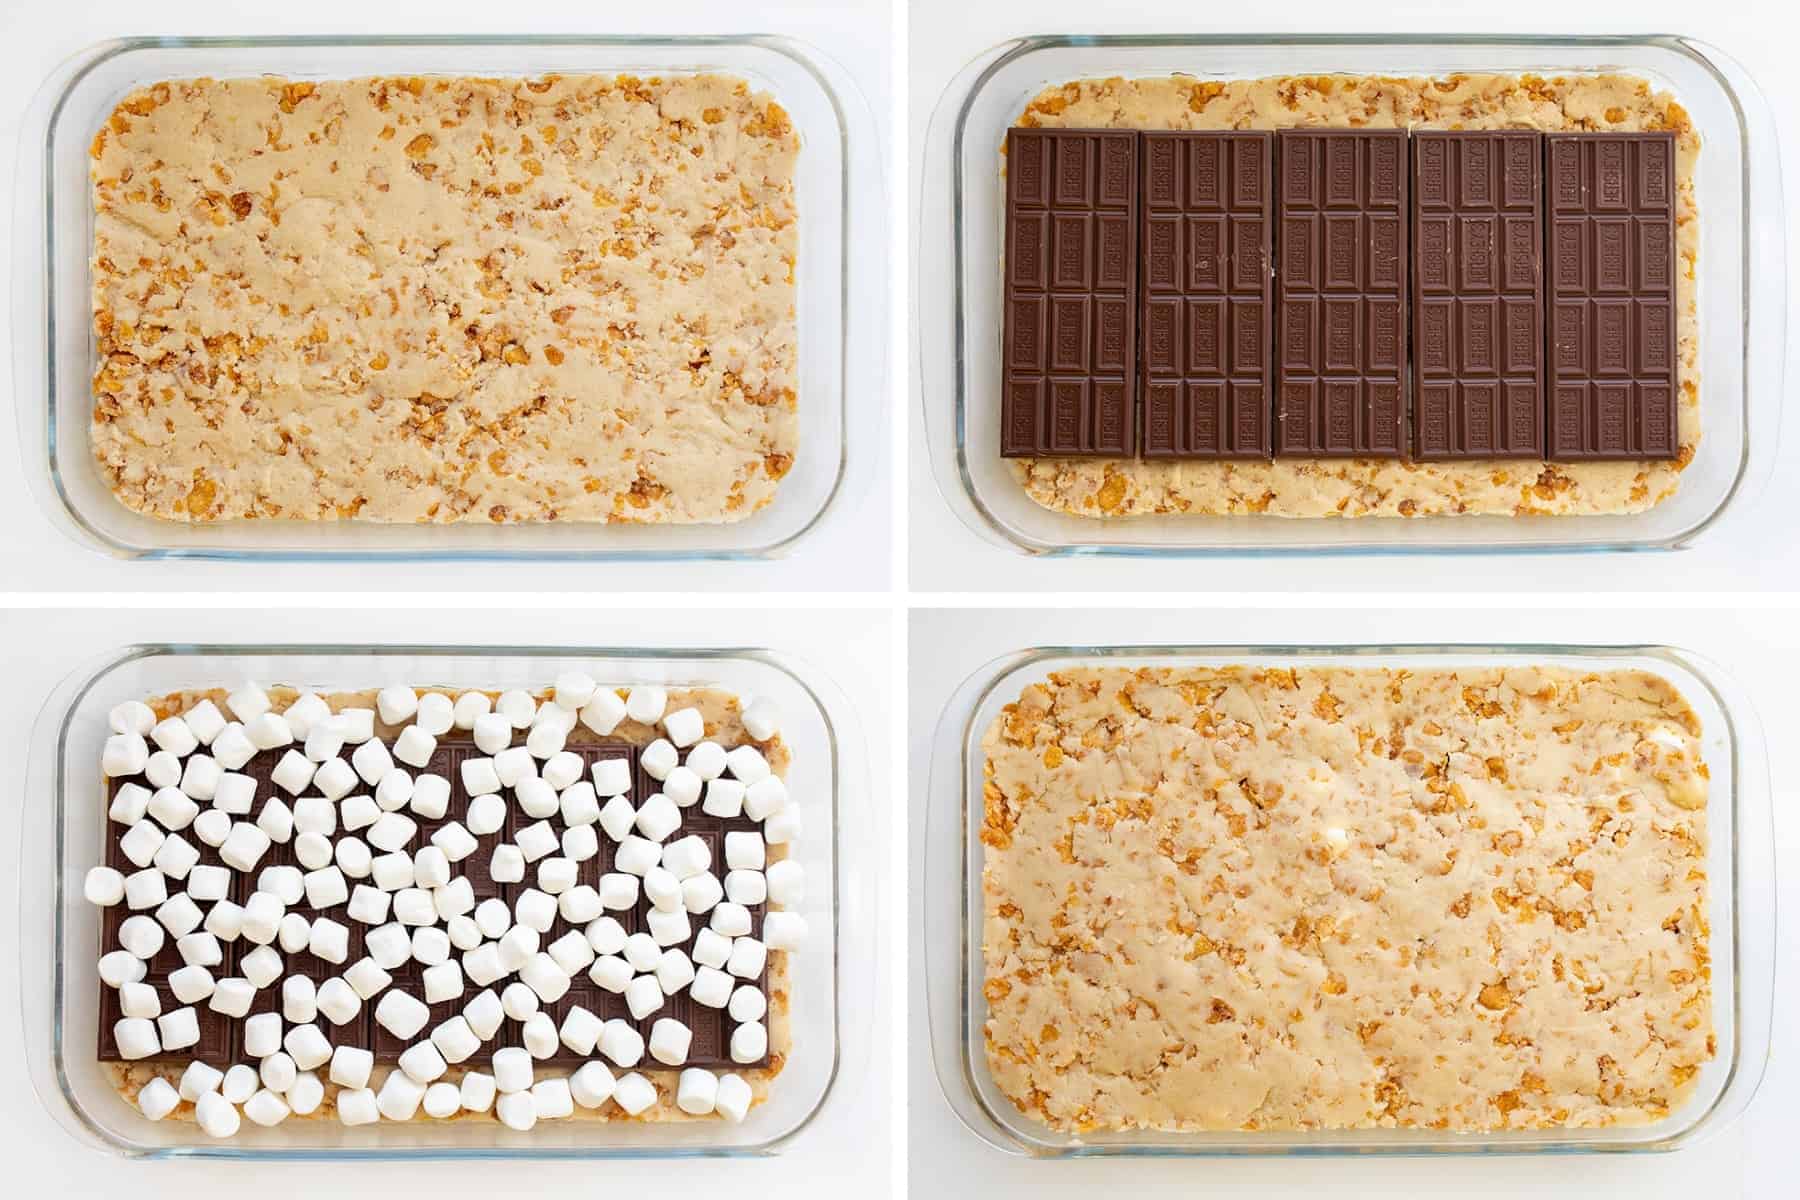 Layers for Cornflake Chocolate Marshmallow Bars starting with dough, chocolate, marshmallows, then more dough